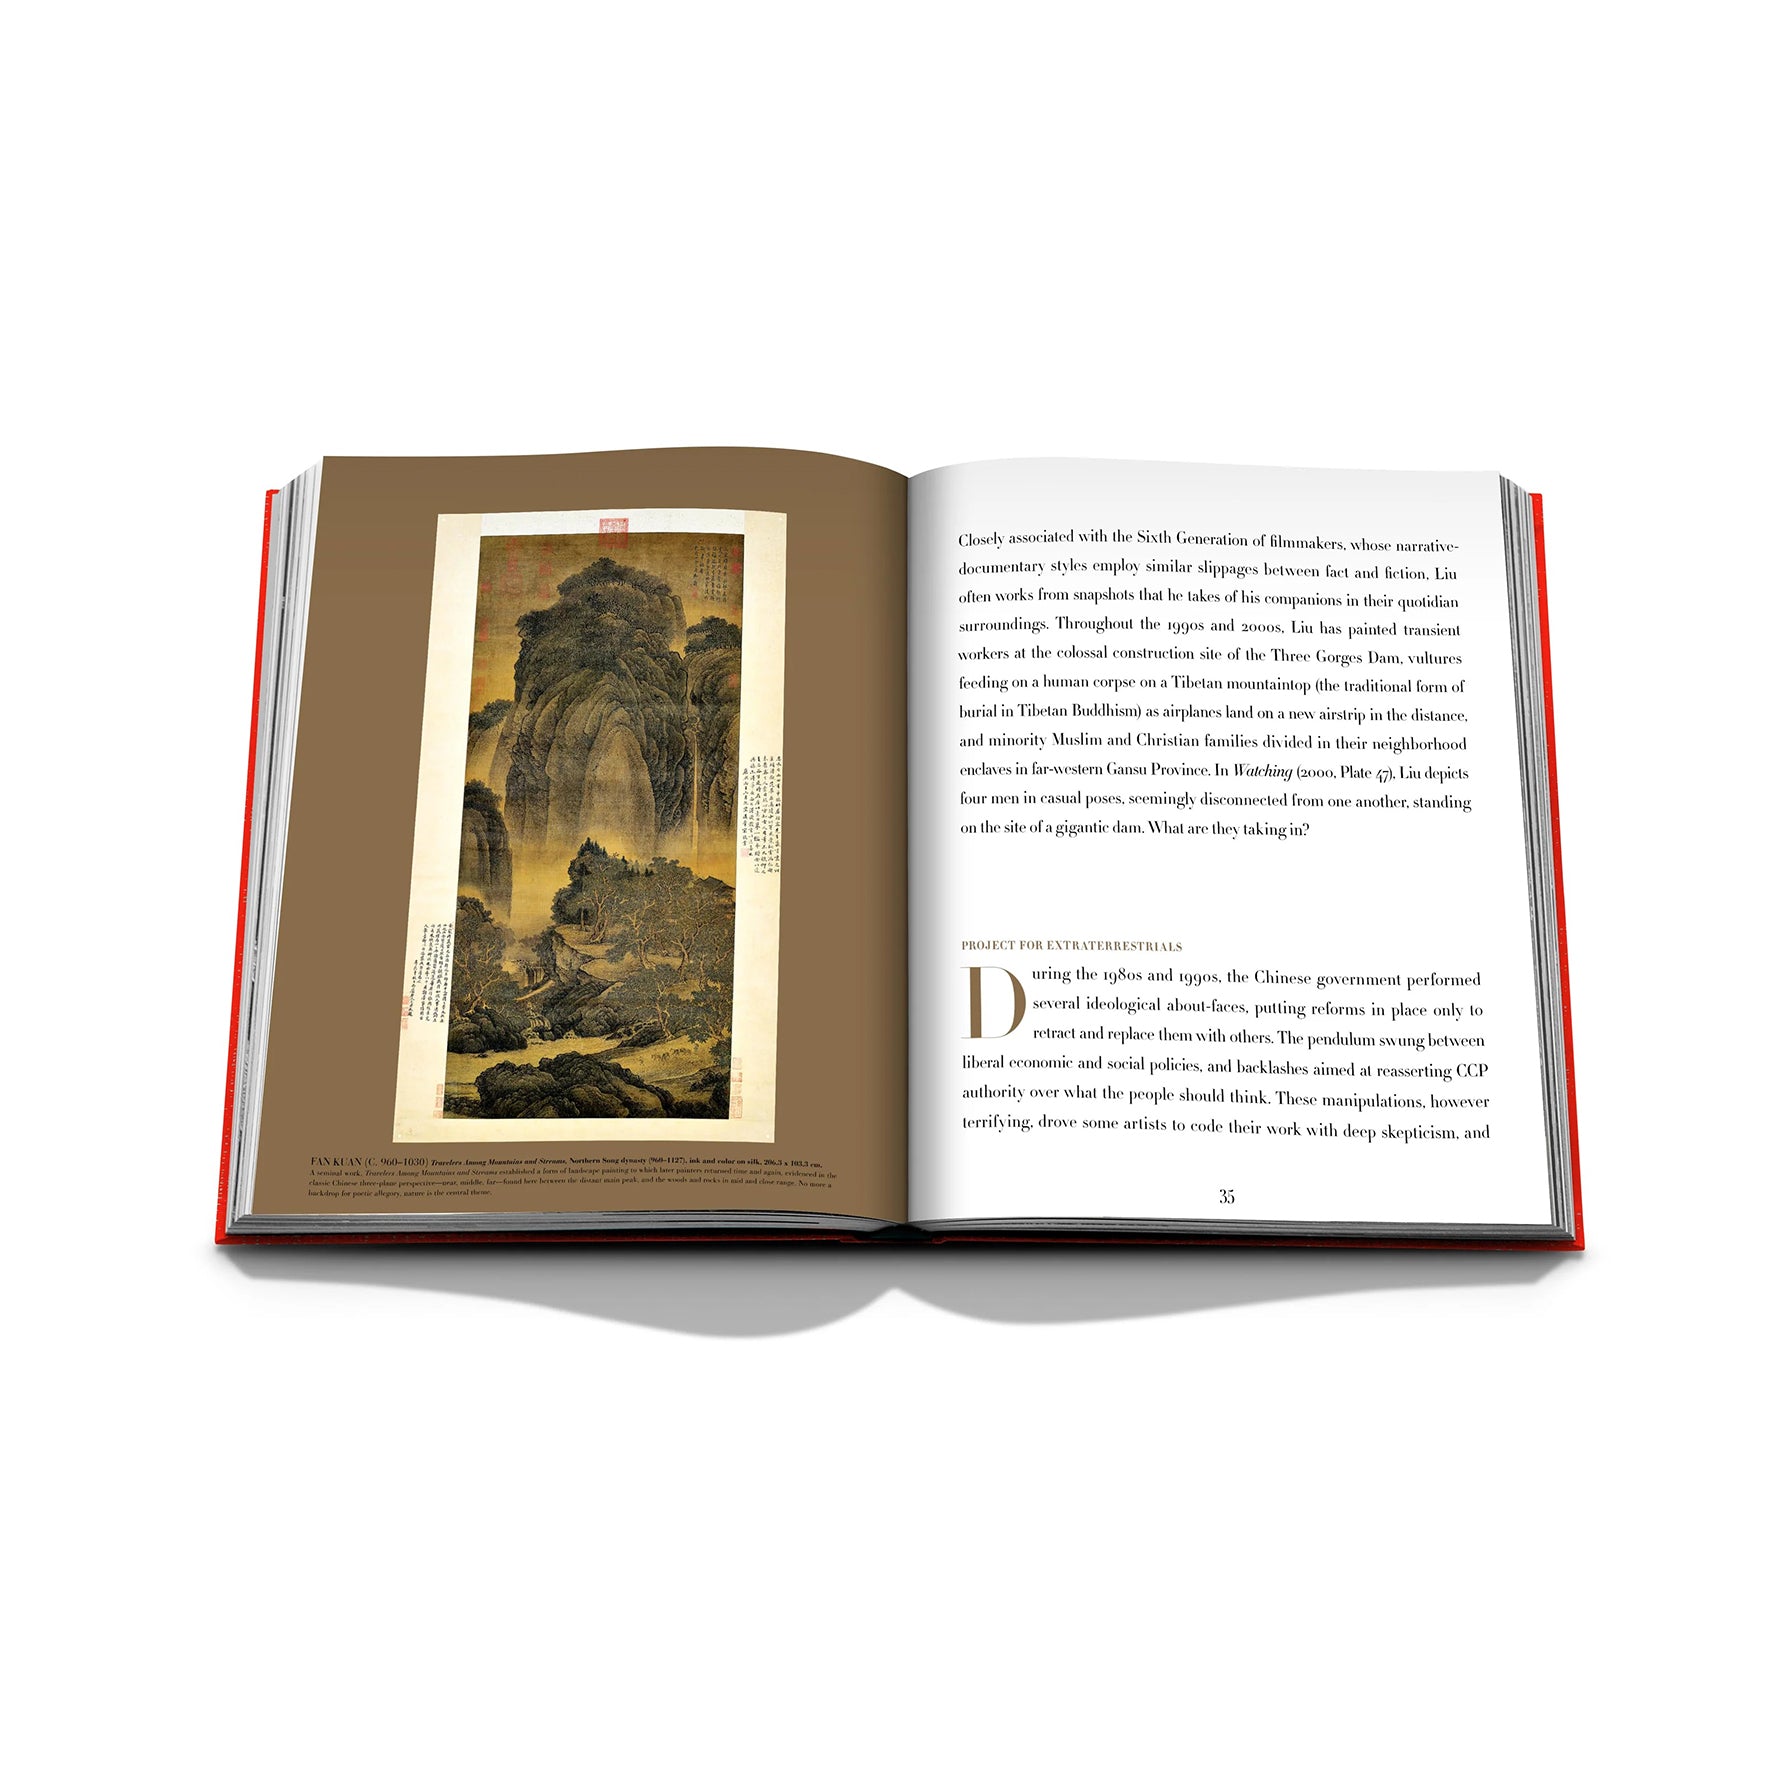 Chinese Art: The Impossible Collection by Assouline